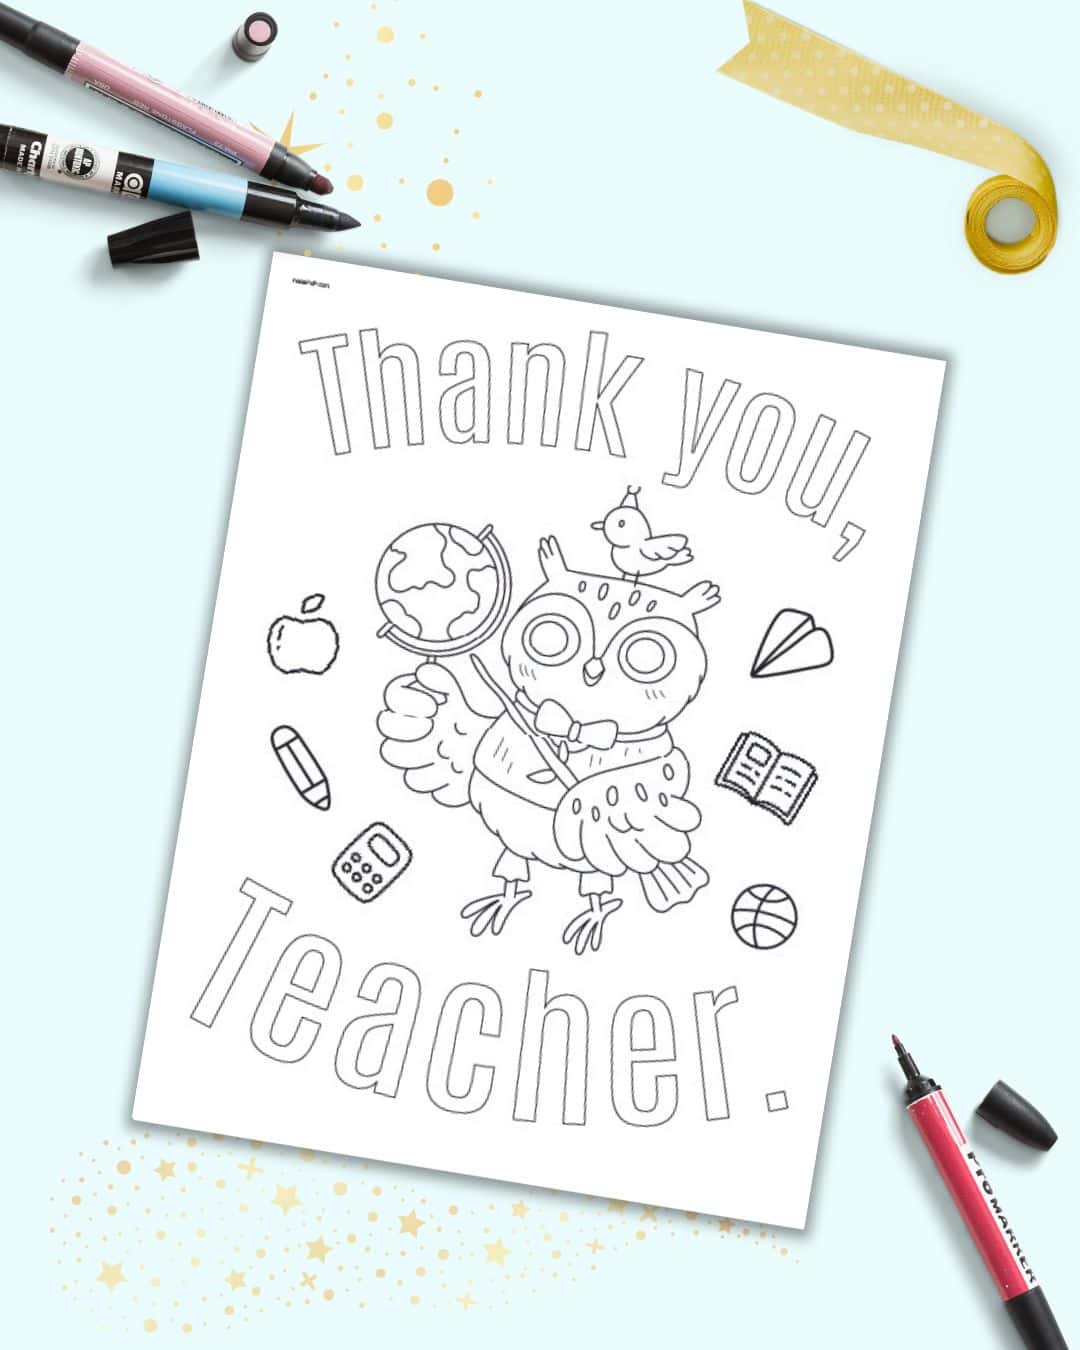 A preview of a coloring page with an owl as a teacher and the text "thank you, Teacher"